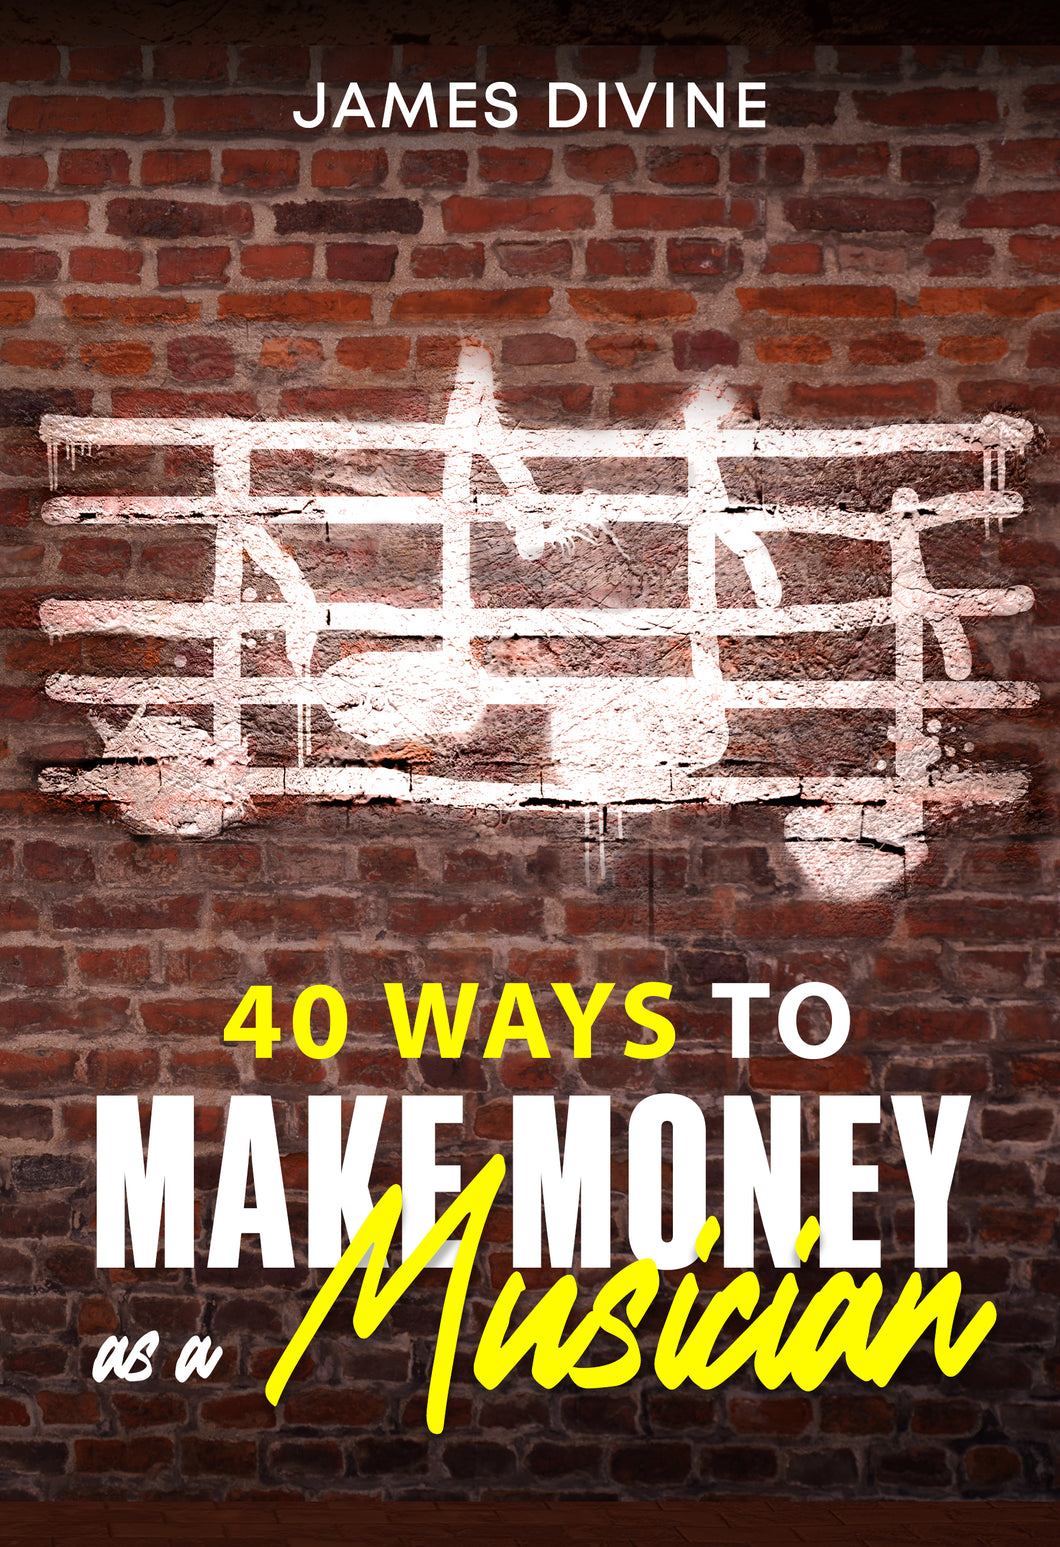 40 Ways To Make Money as a Musician (pdf download)